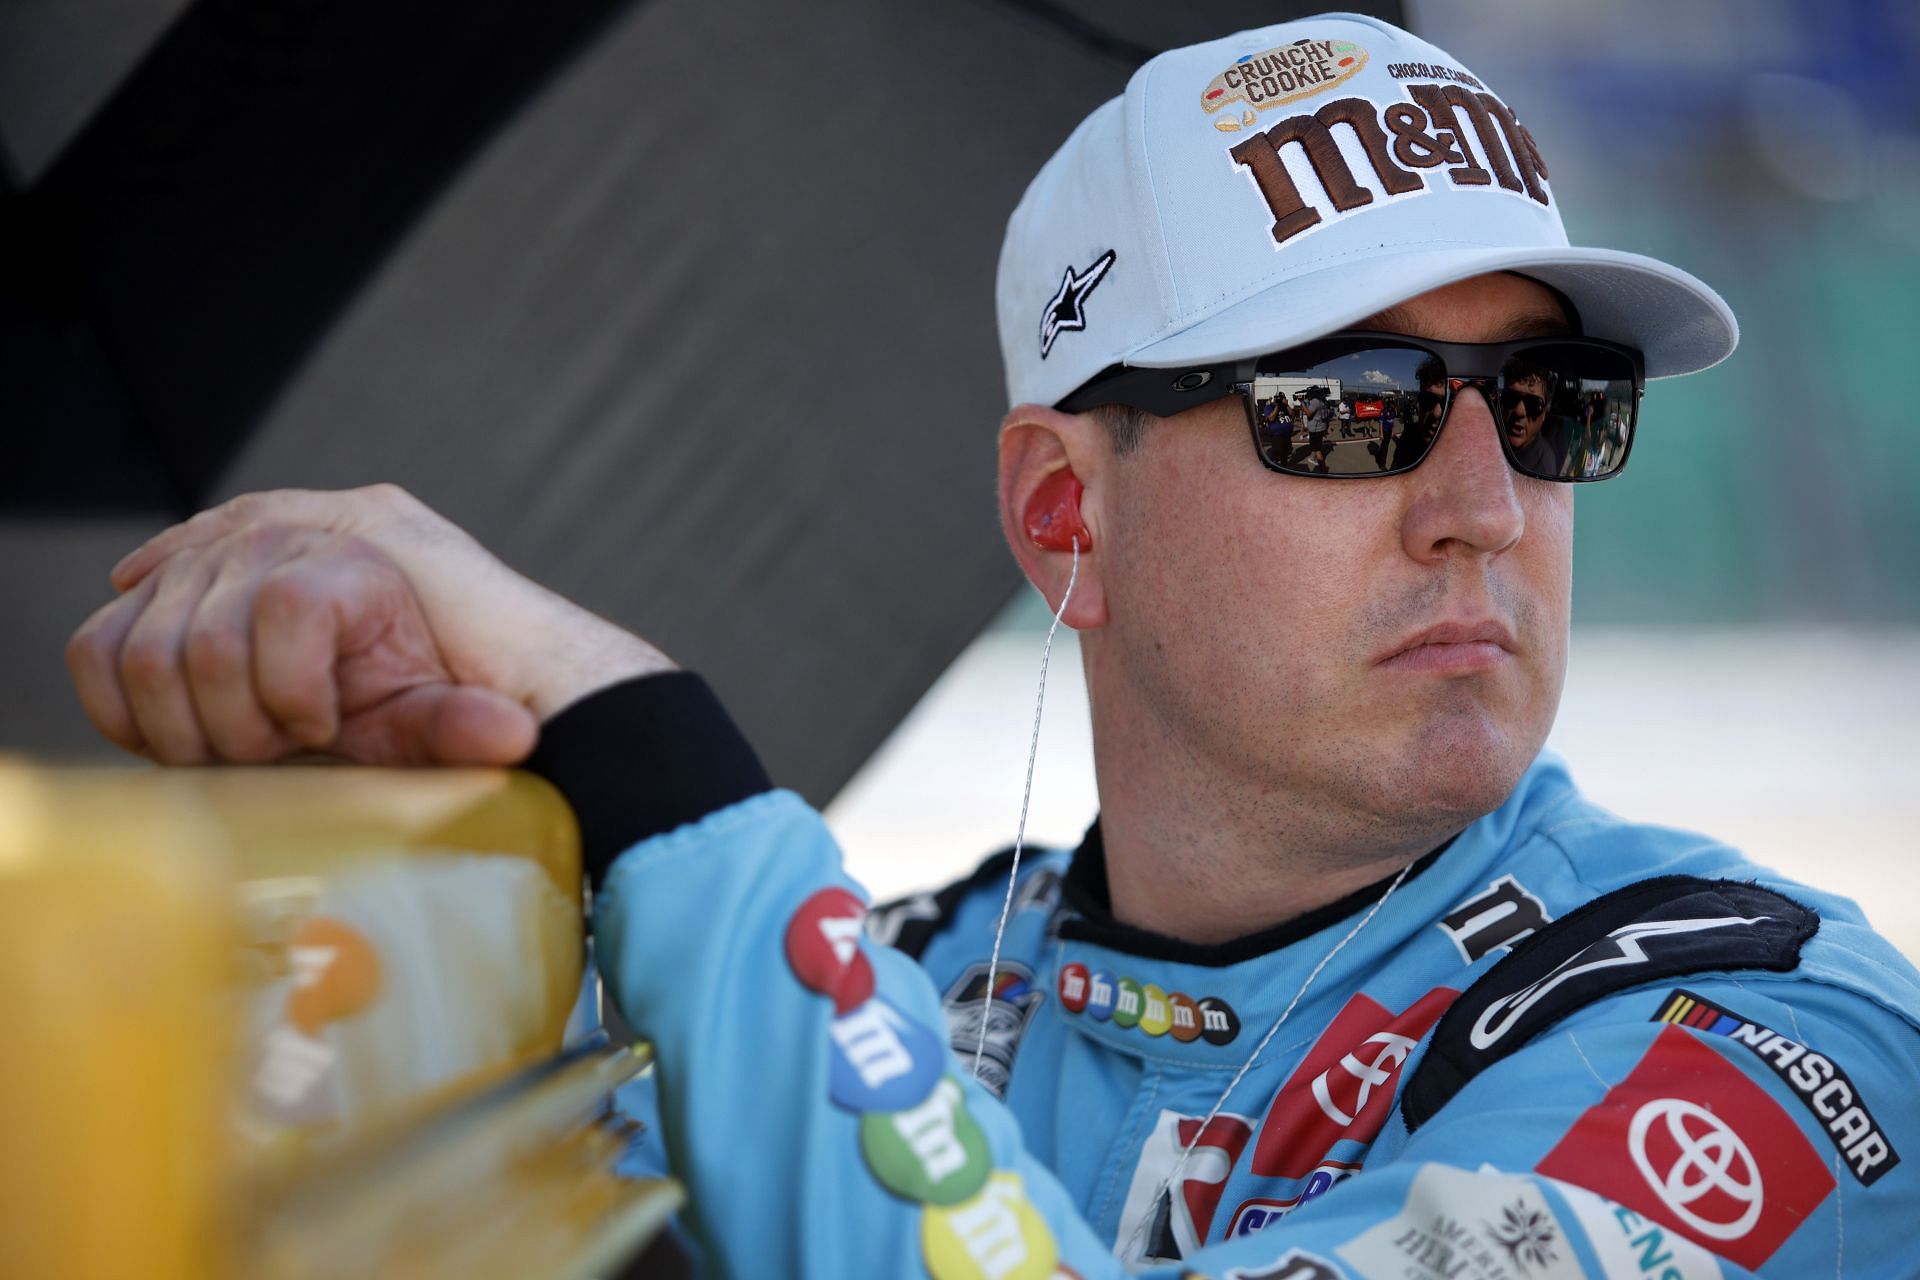 Kyle Busch looks on during practice for the 2022 NASCAR Cup Series AdventHealth 400 at Kansas Speedway in Kansas City, Kansas. (Photo by Sean Gardner/Getty Images)